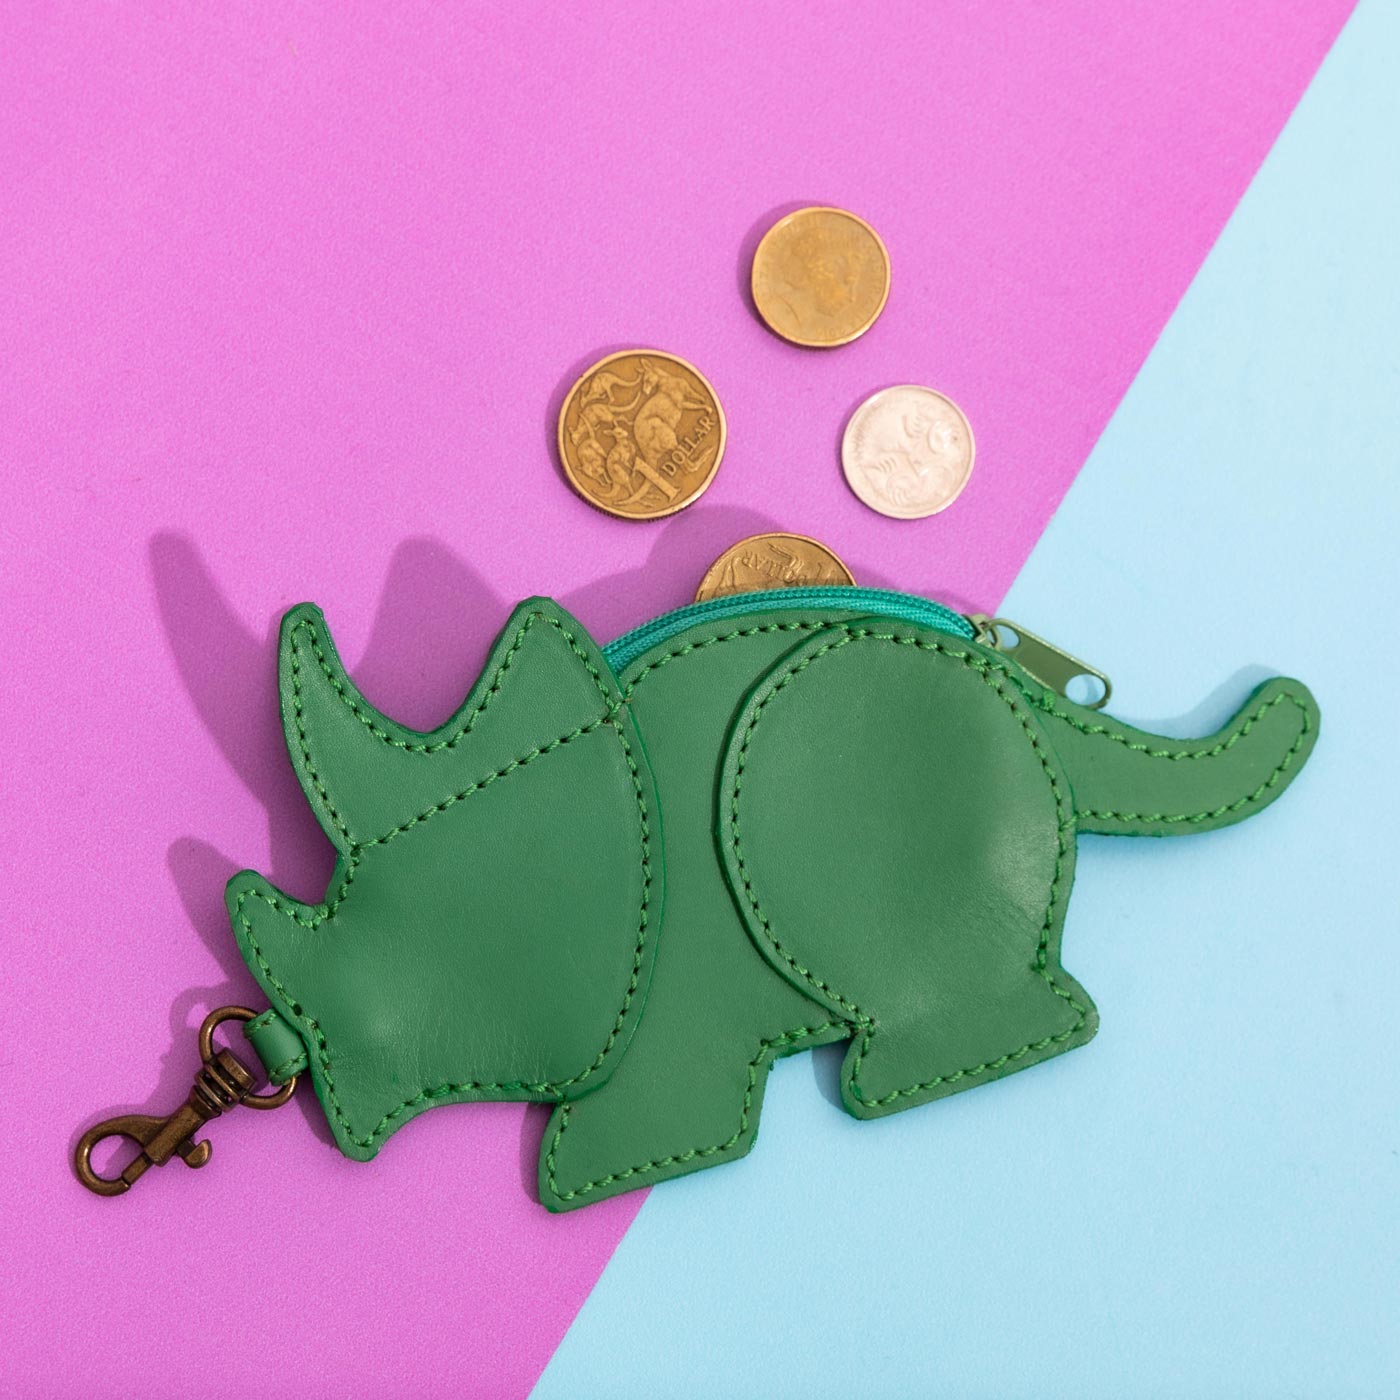 Wicker Darling's Benedict the triceratops mini coin purse on a colourful background